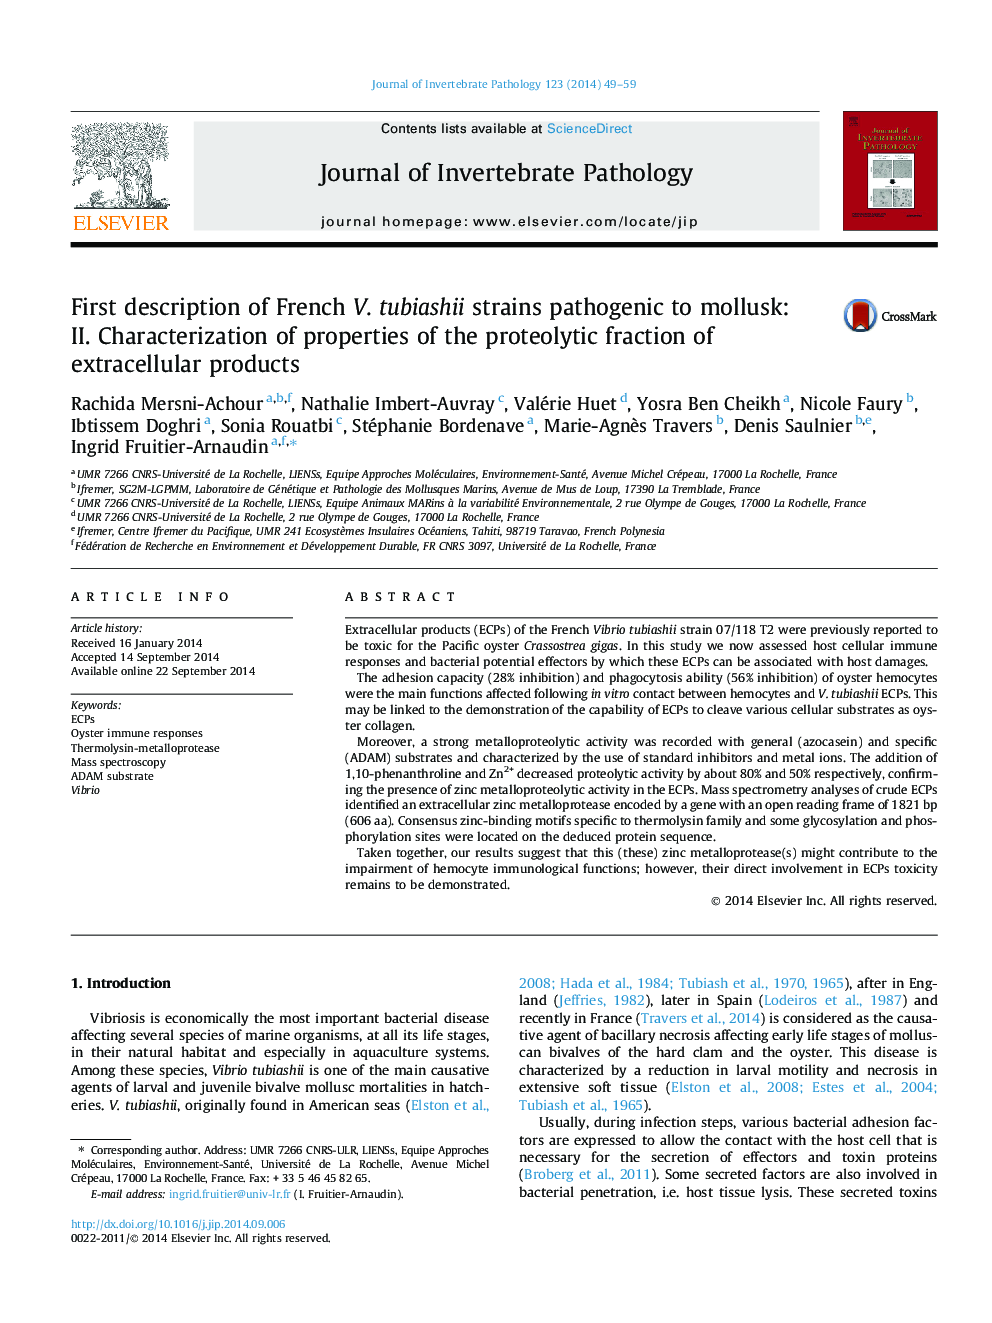 First description of French V. tubiashii strains pathogenic to mollusk: II. Characterization of properties of the proteolytic fraction of extracellular products